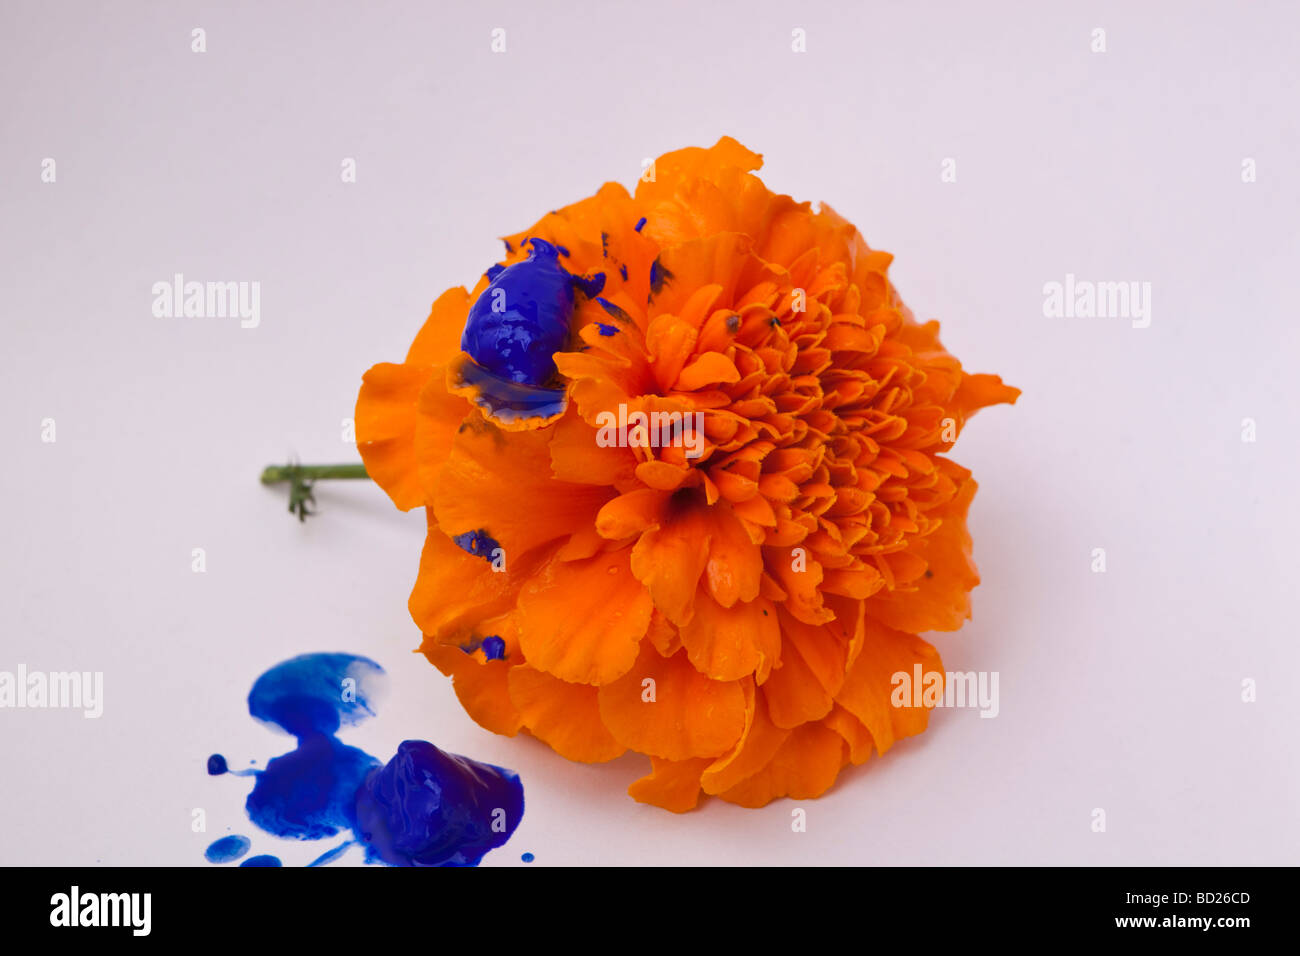 A simple orange cut flower splashed with blue paint Stock Photo